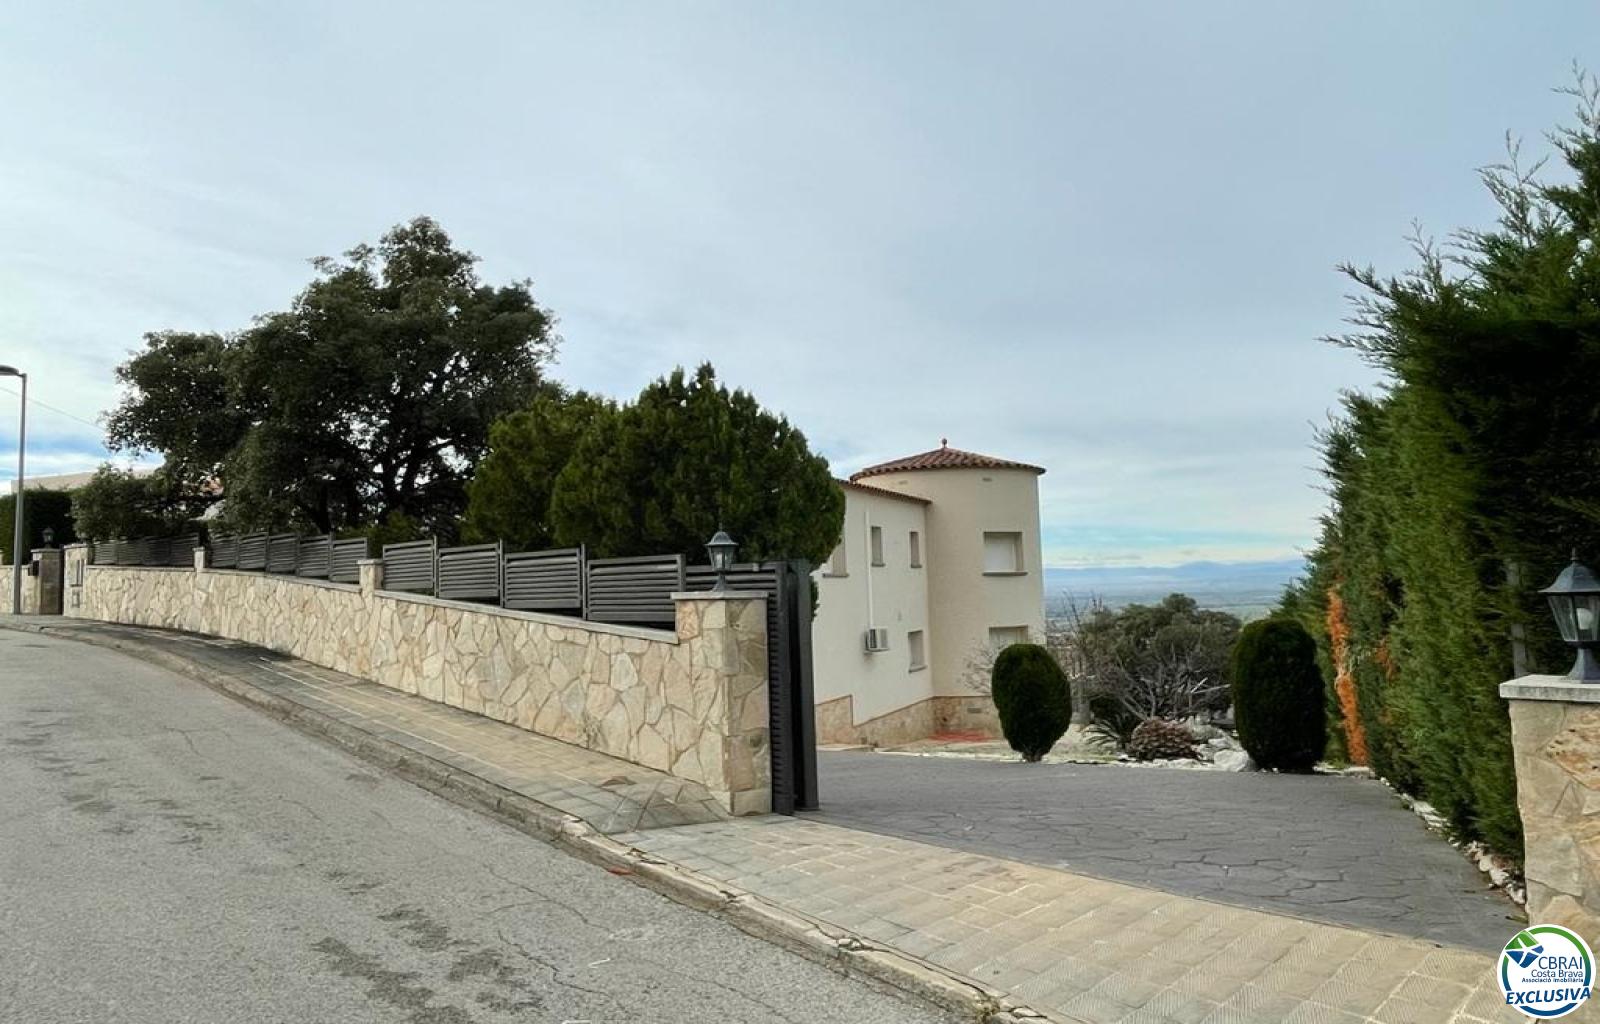 EXCLUSIVE VILLA OF 336 M2 BUILT WITH 890 M2 OF PLOT, 4 BEDROOMS, 3 BATHROOMS, SWIMMING POOL, LARGE TERRACES WITH VIEWS TO THE BAY OF ROSES.